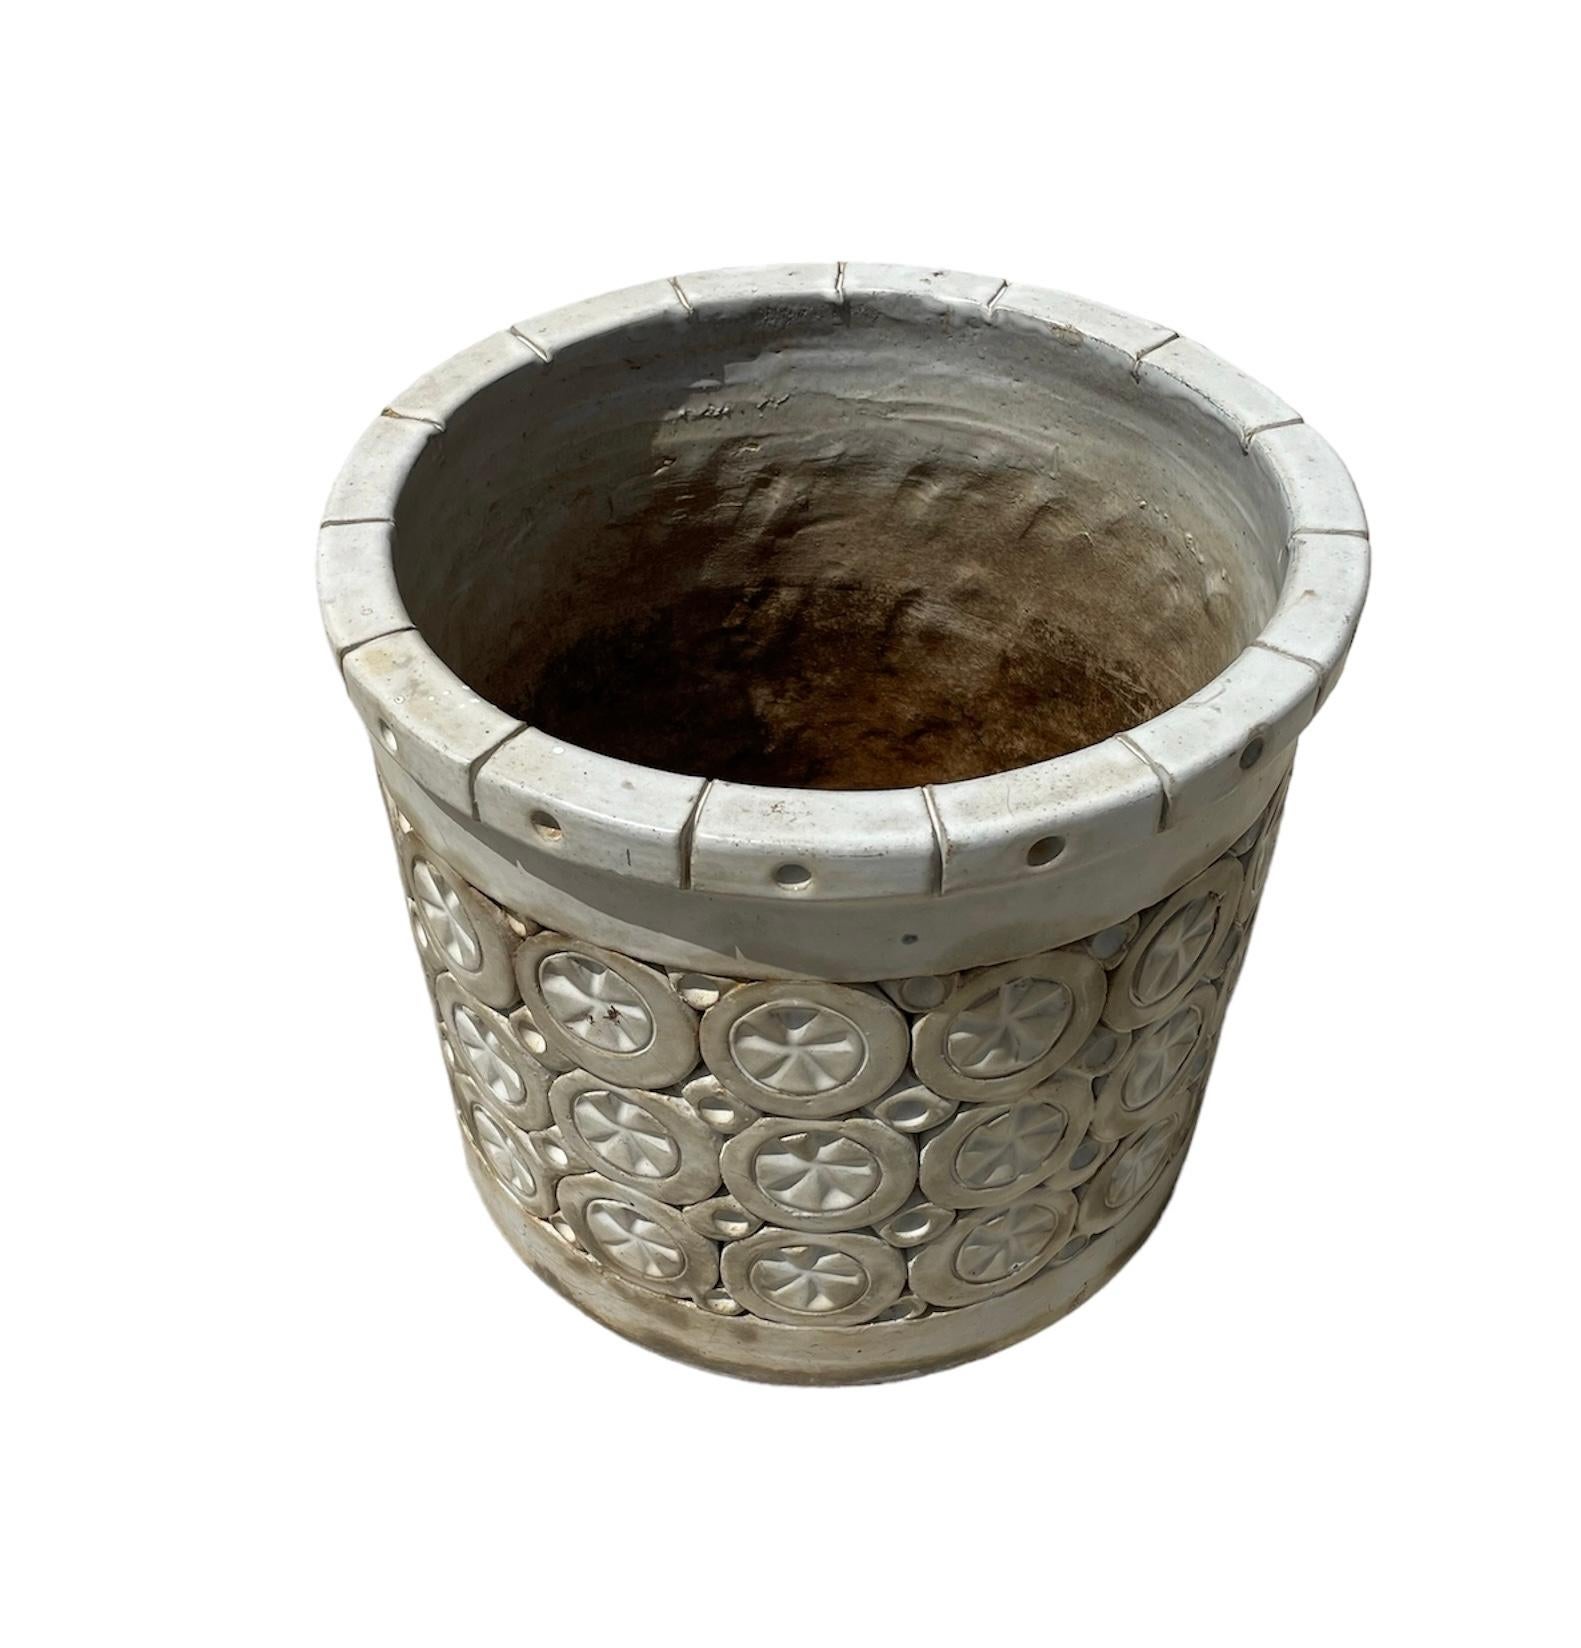 This is an Isla Del Sol Stoneware Planter. It depicts a heavy round planter decorated with three rows of circles adorned in the center with stars alternated with four rows of squares with concave hemispheric centers. The upper border is also